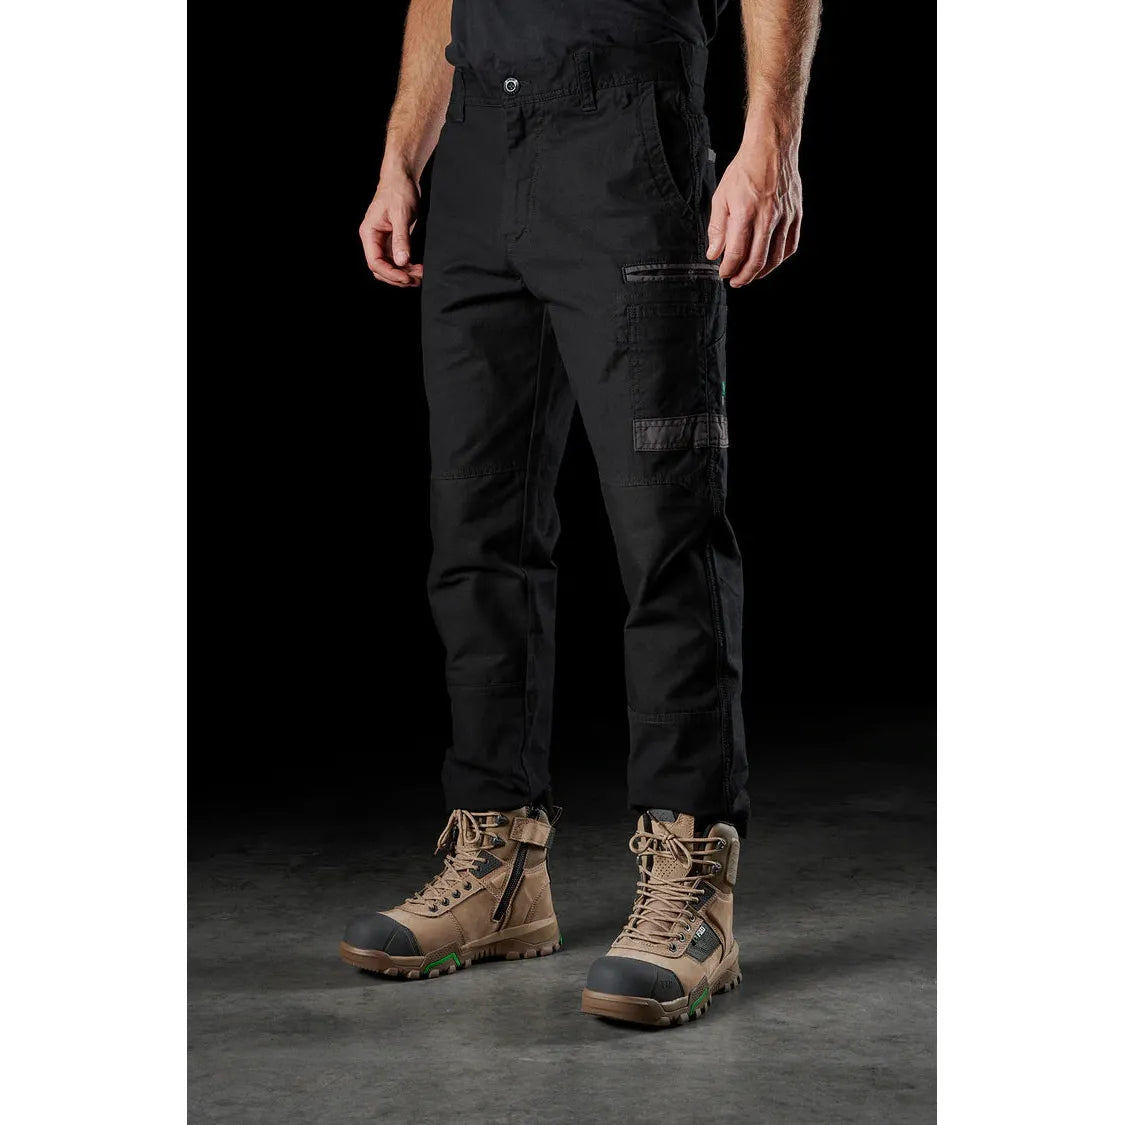 FXD WP-3 Work Pants